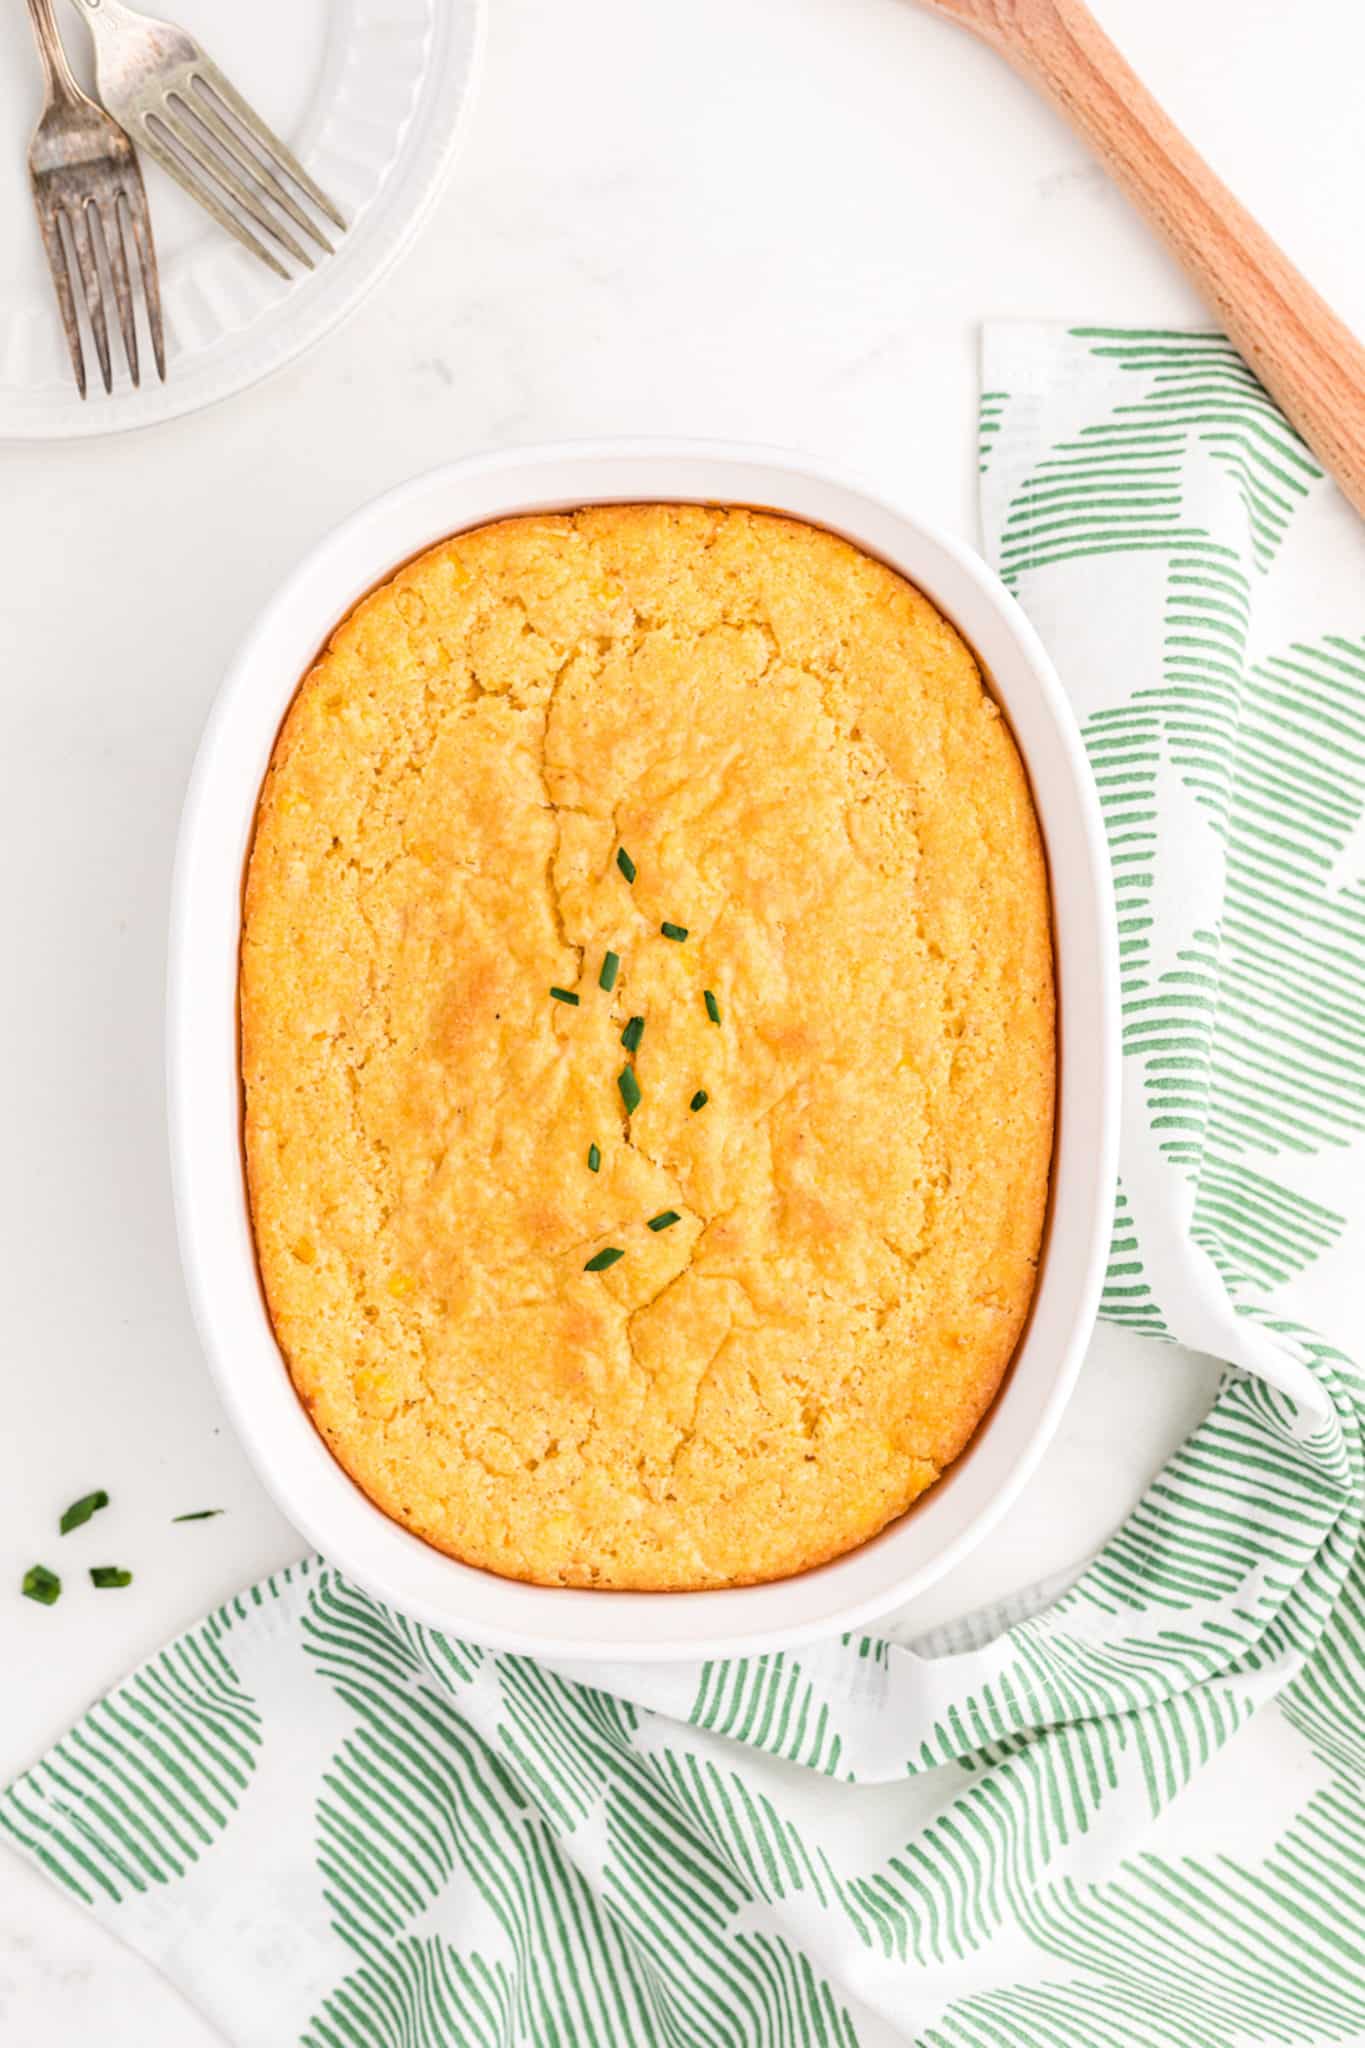 dairy free corn casserole served in baking dish on table.